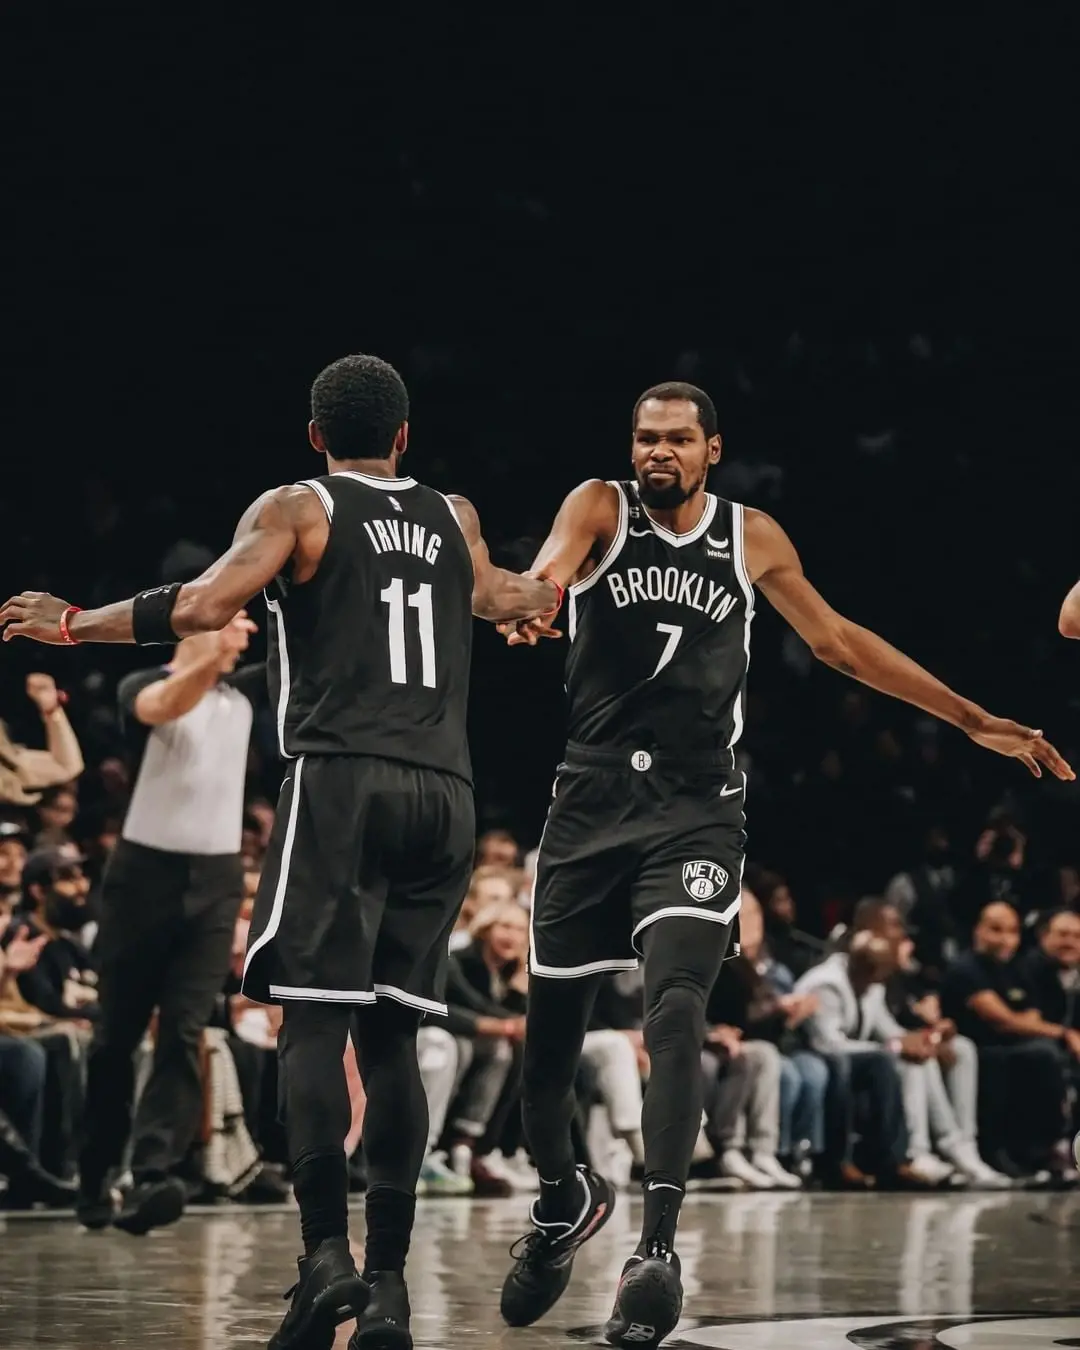 Brooklyn Nets players Kyrie Irving (left) and Kevin Durant (right) in a game on January 2023 